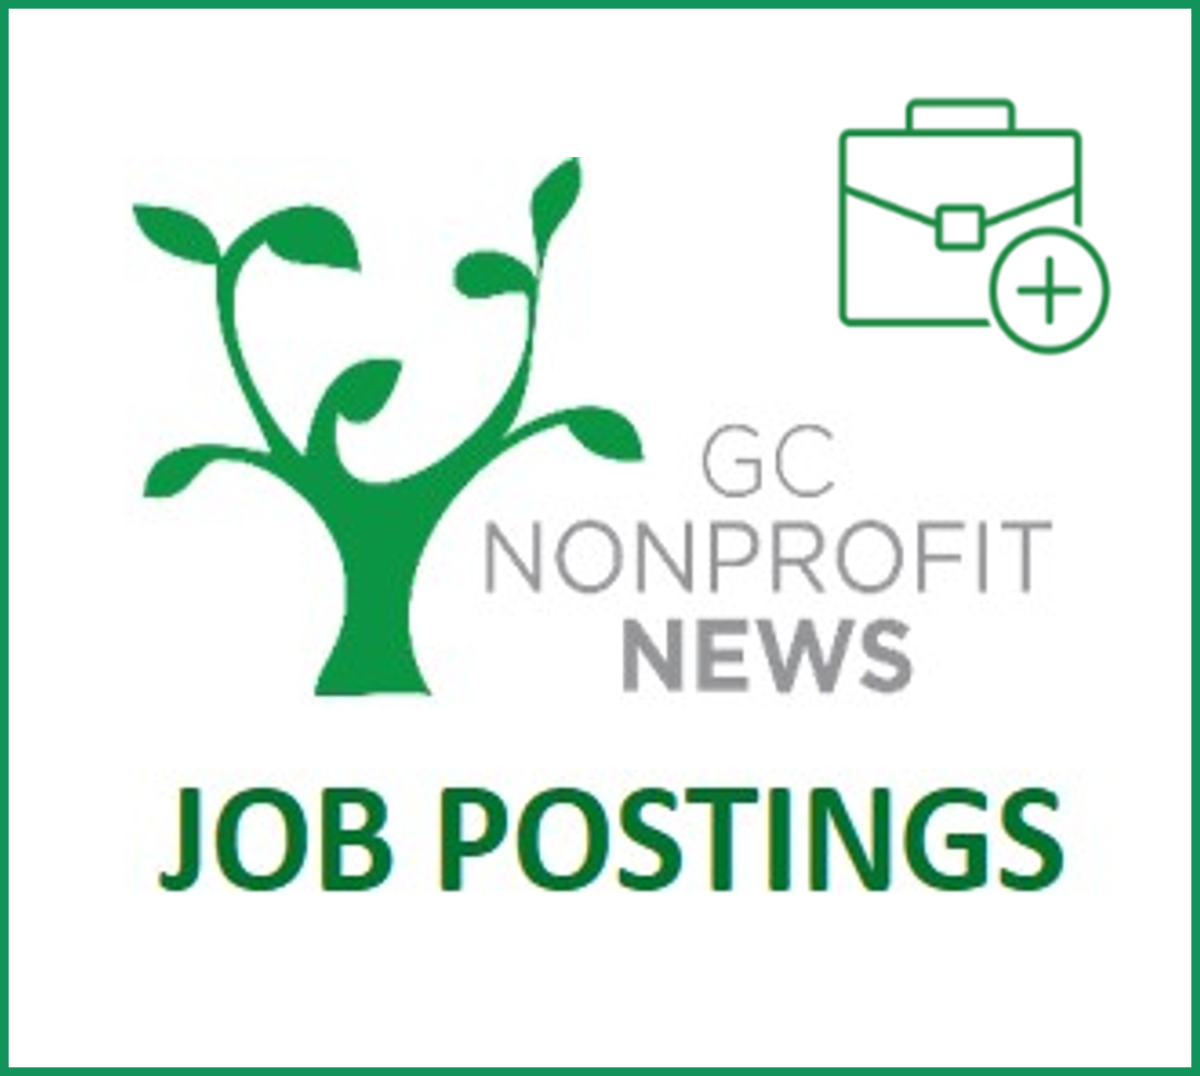 Your Special New Years' Jobs Issue of GC Nonprofit News